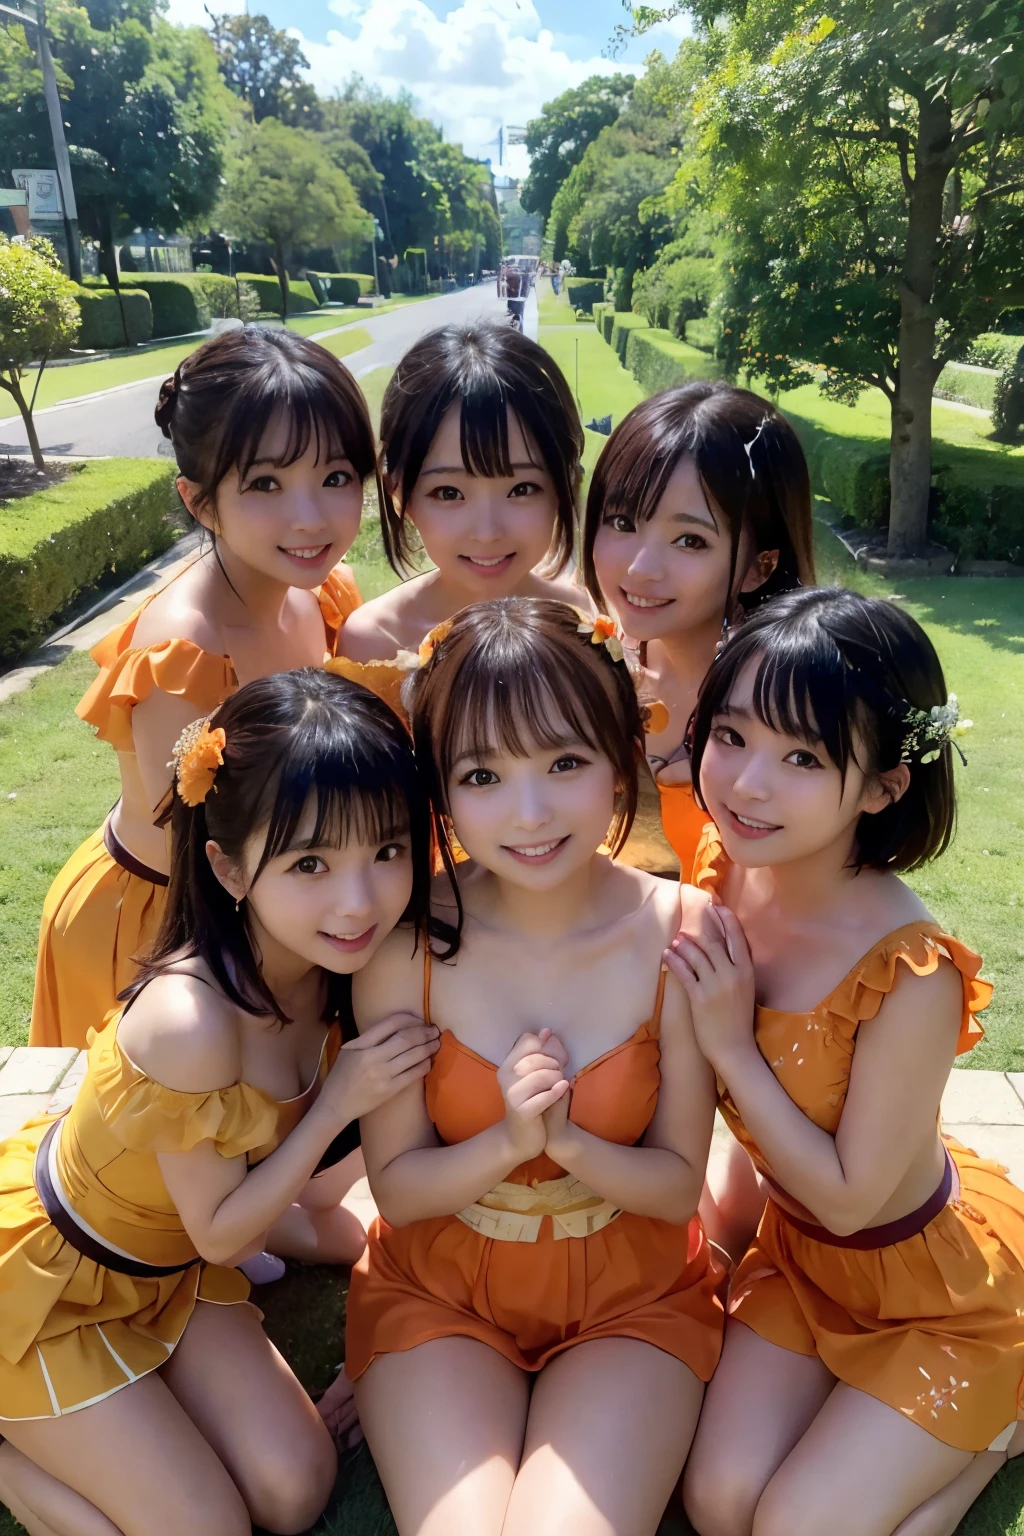 ((Best quality, masterpiece)), five lifelong friends,japanese idol,costume,((orange juice)), warmly embracing, smiling ear-to-ear, surrounded by lush greenery and a crisp blue sky, basking in the sunshine of a perfect day.